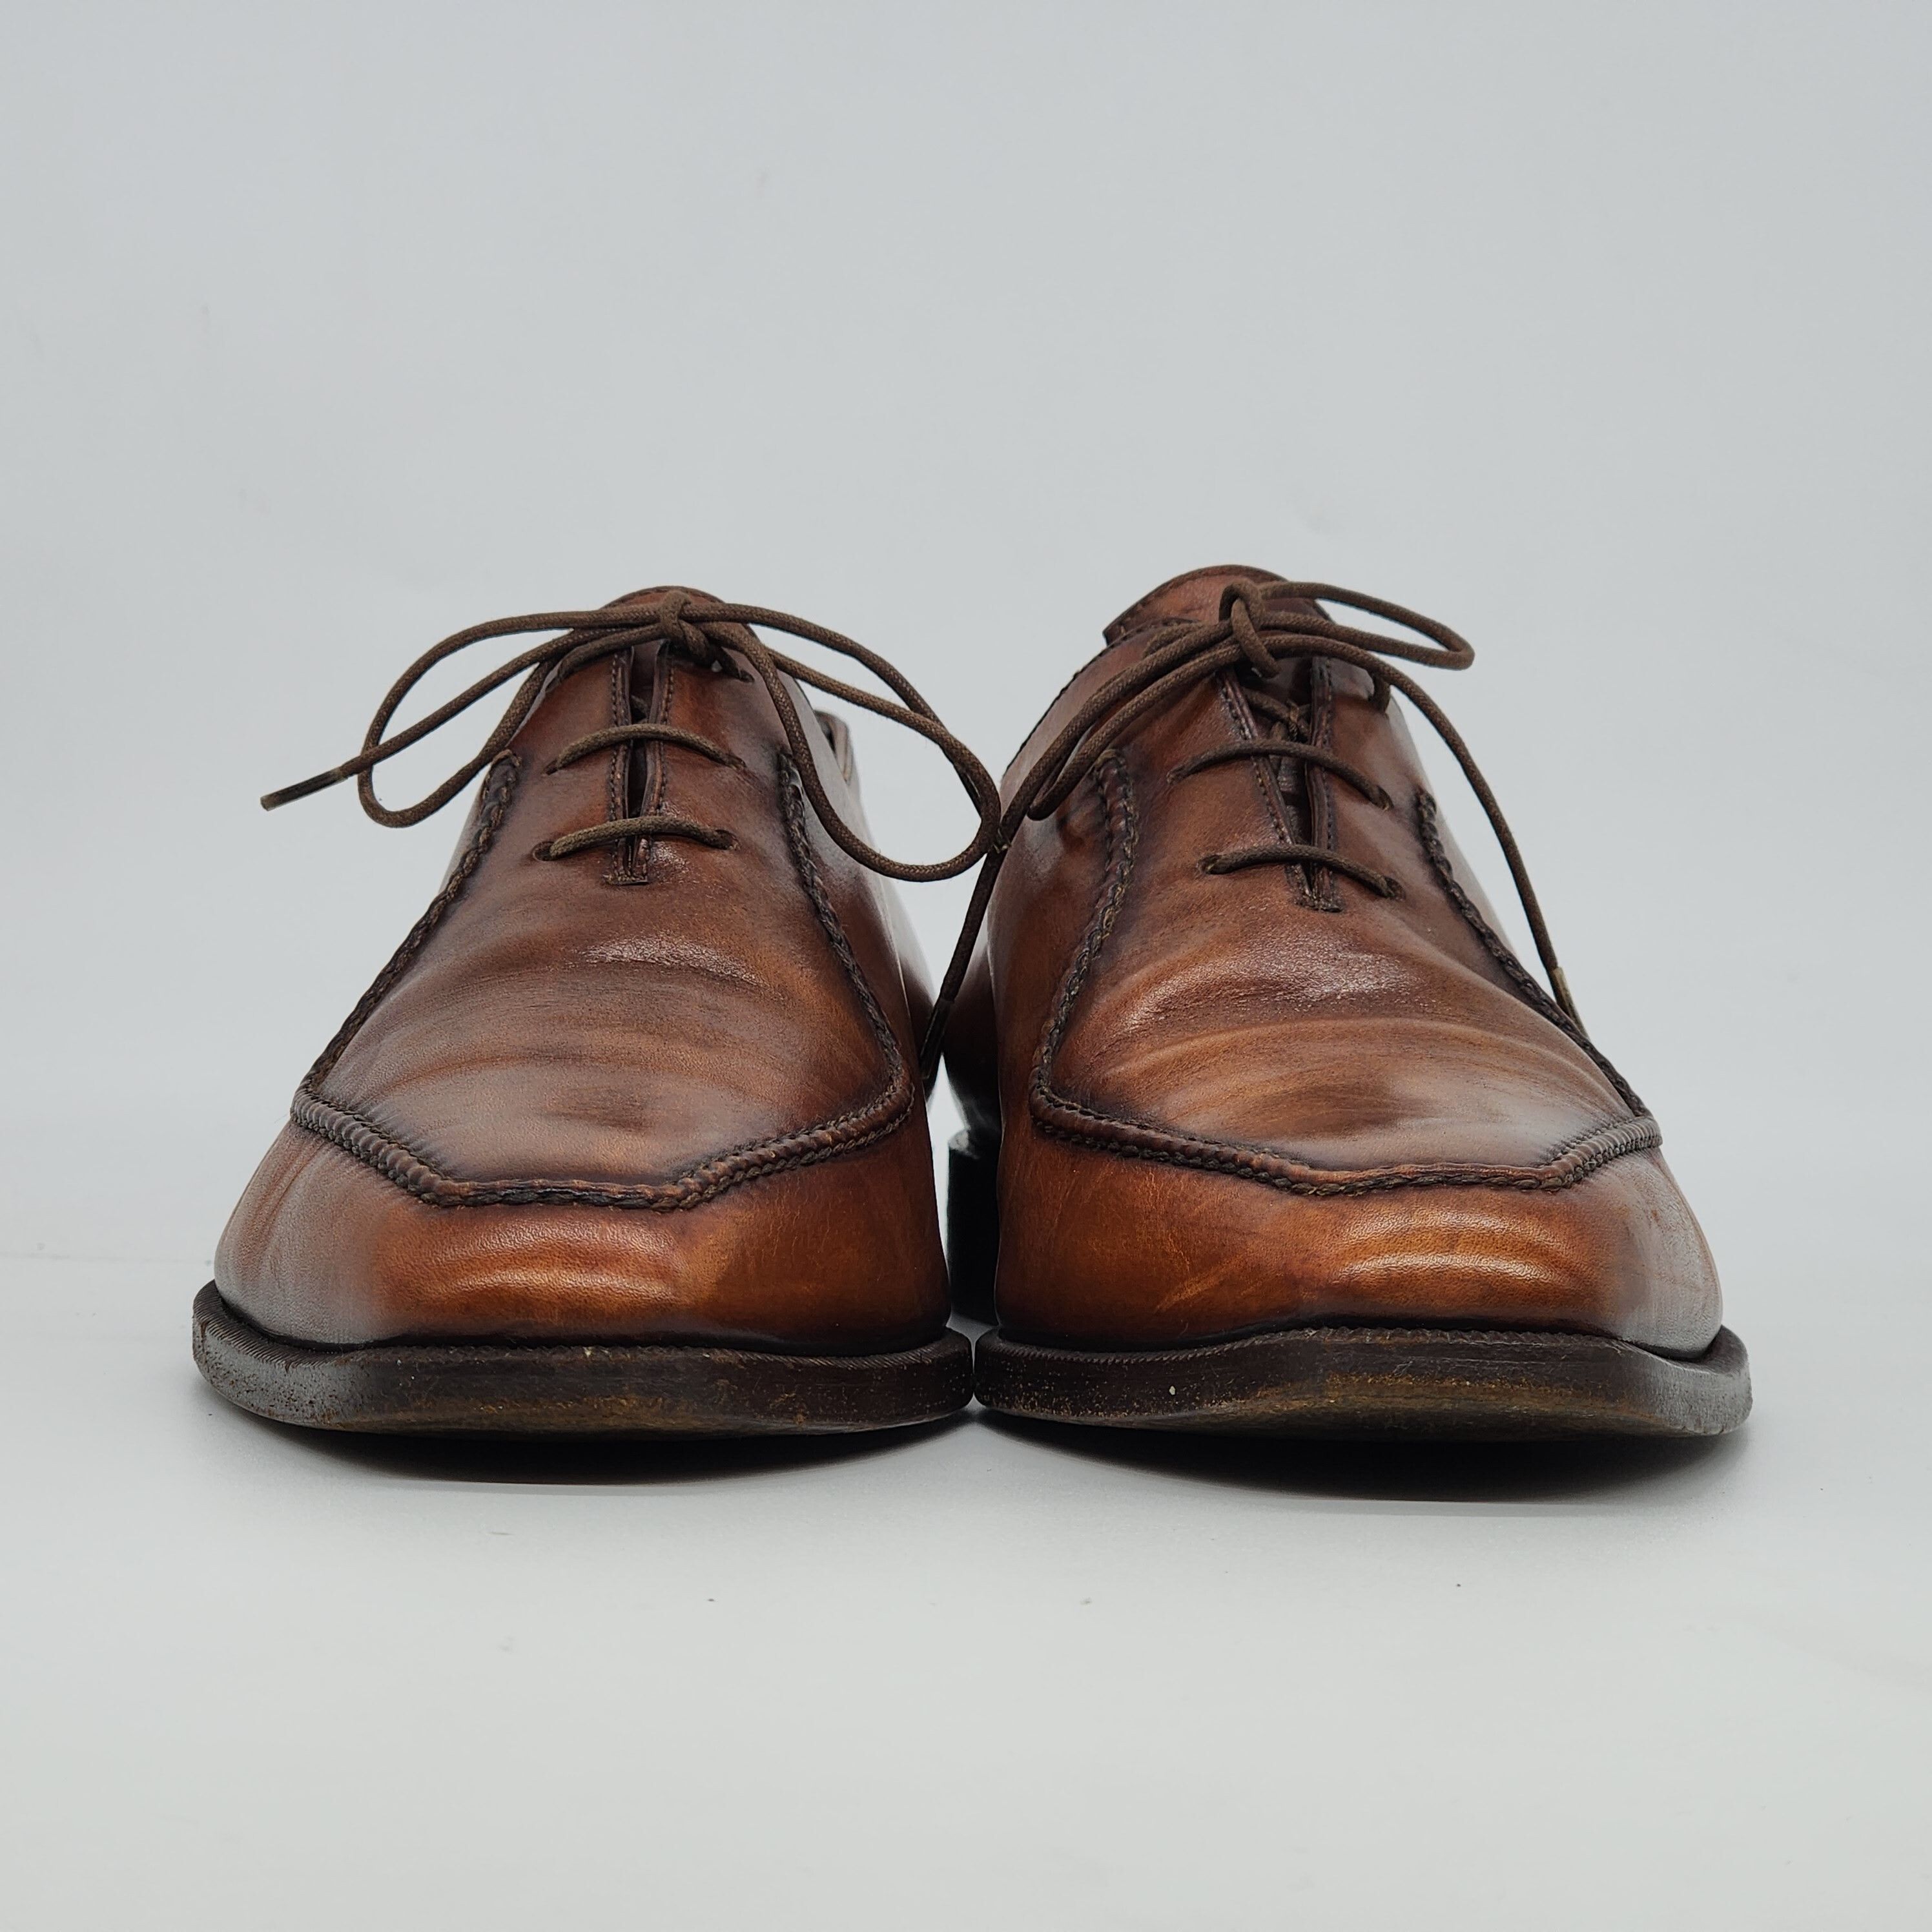 Berluti - Stitched Detail Leather Oxford Shoes - 2